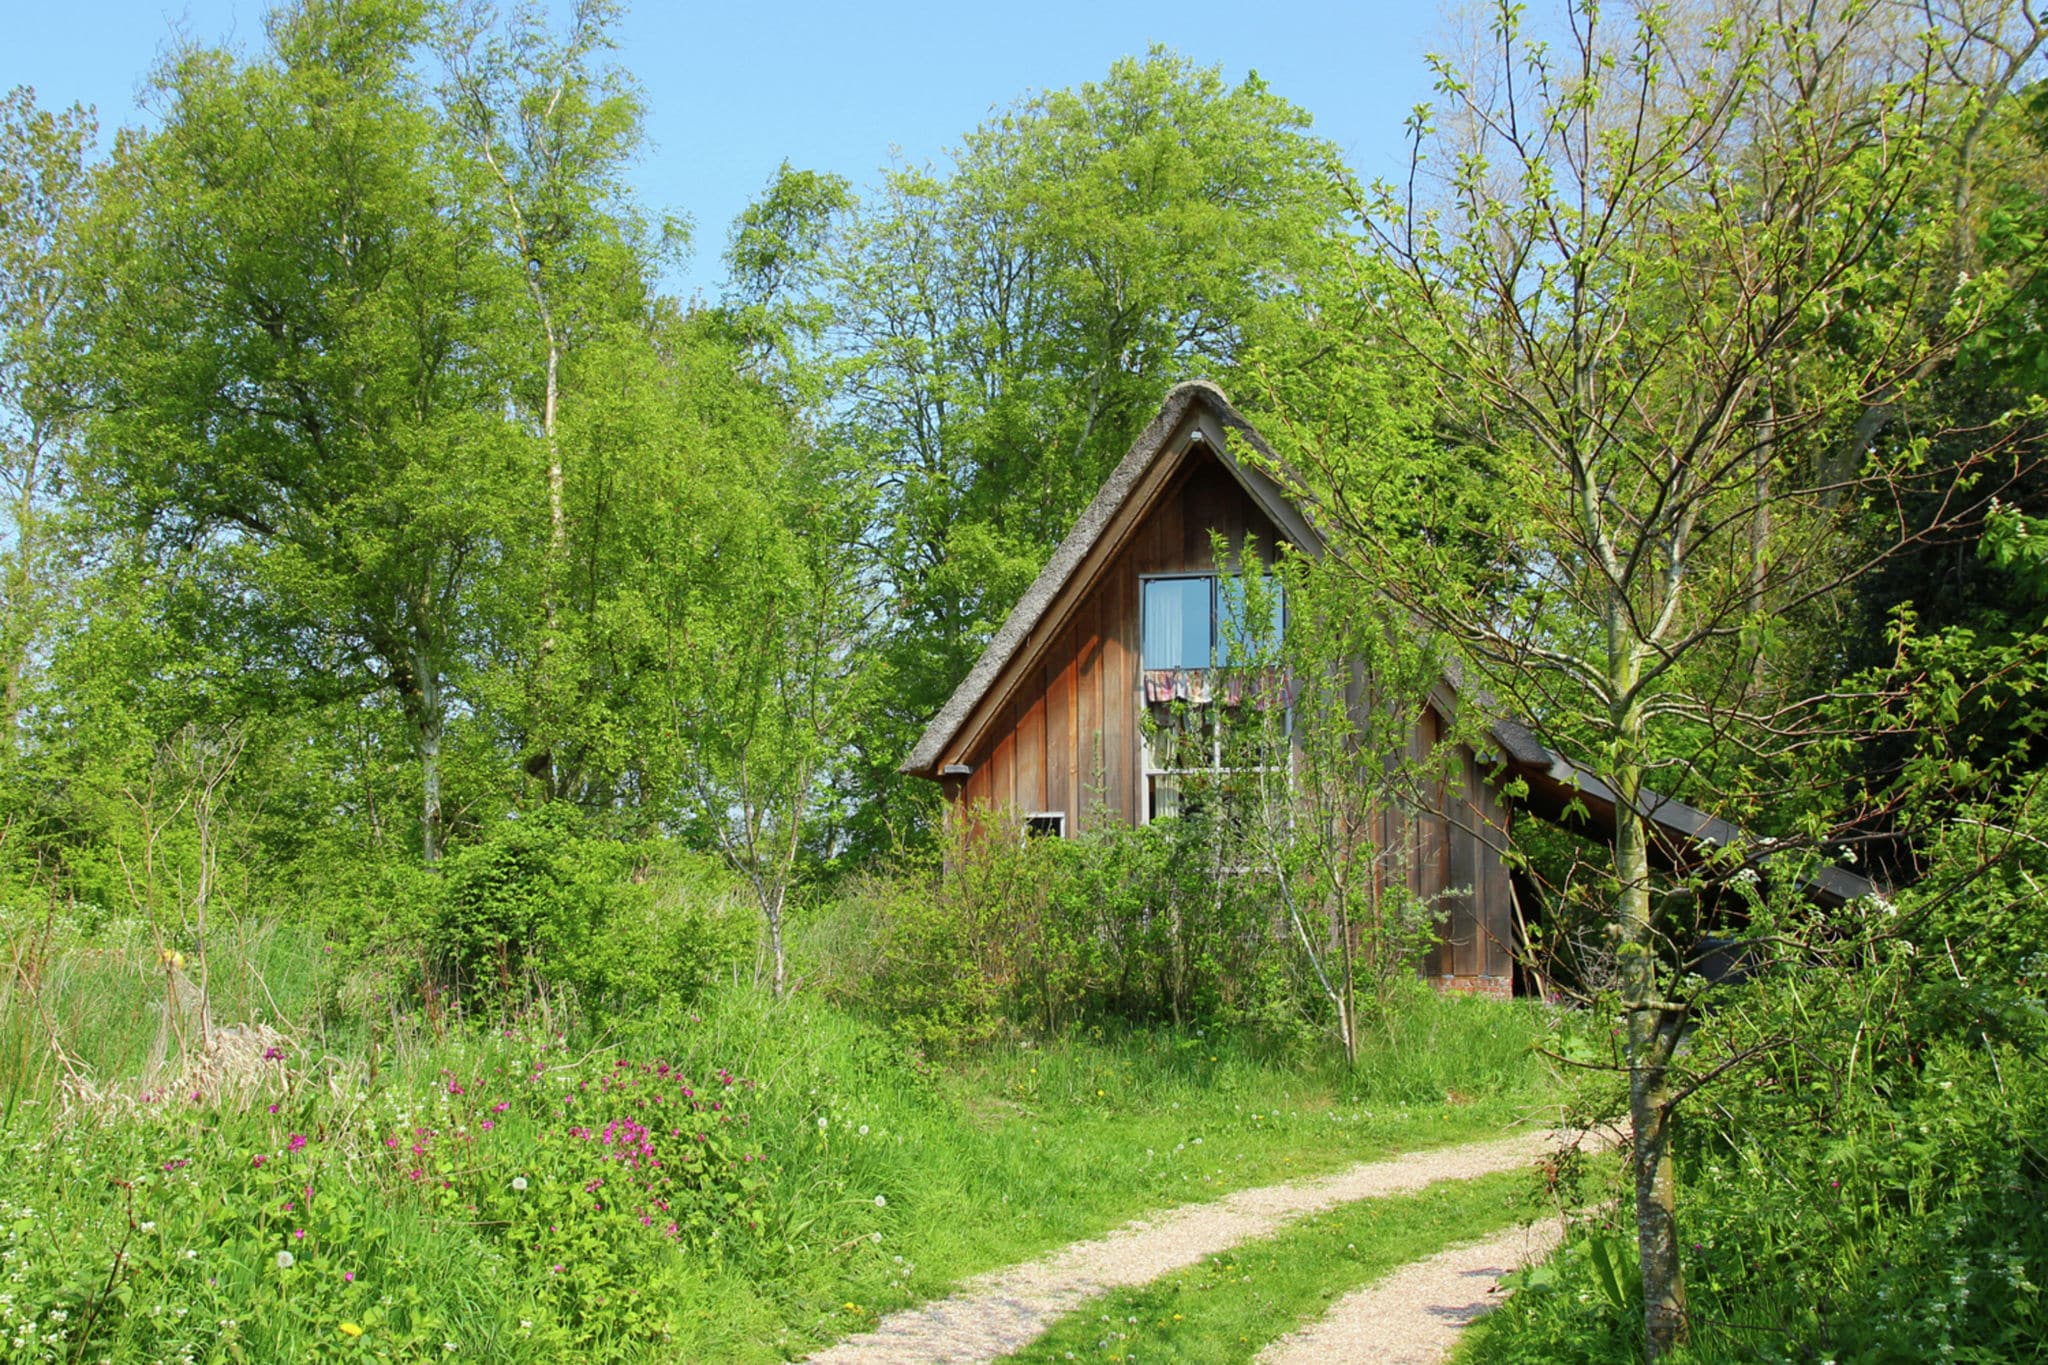 Fairytale cottage nestled between forest and village within cycling distance of Bergen aan Zee